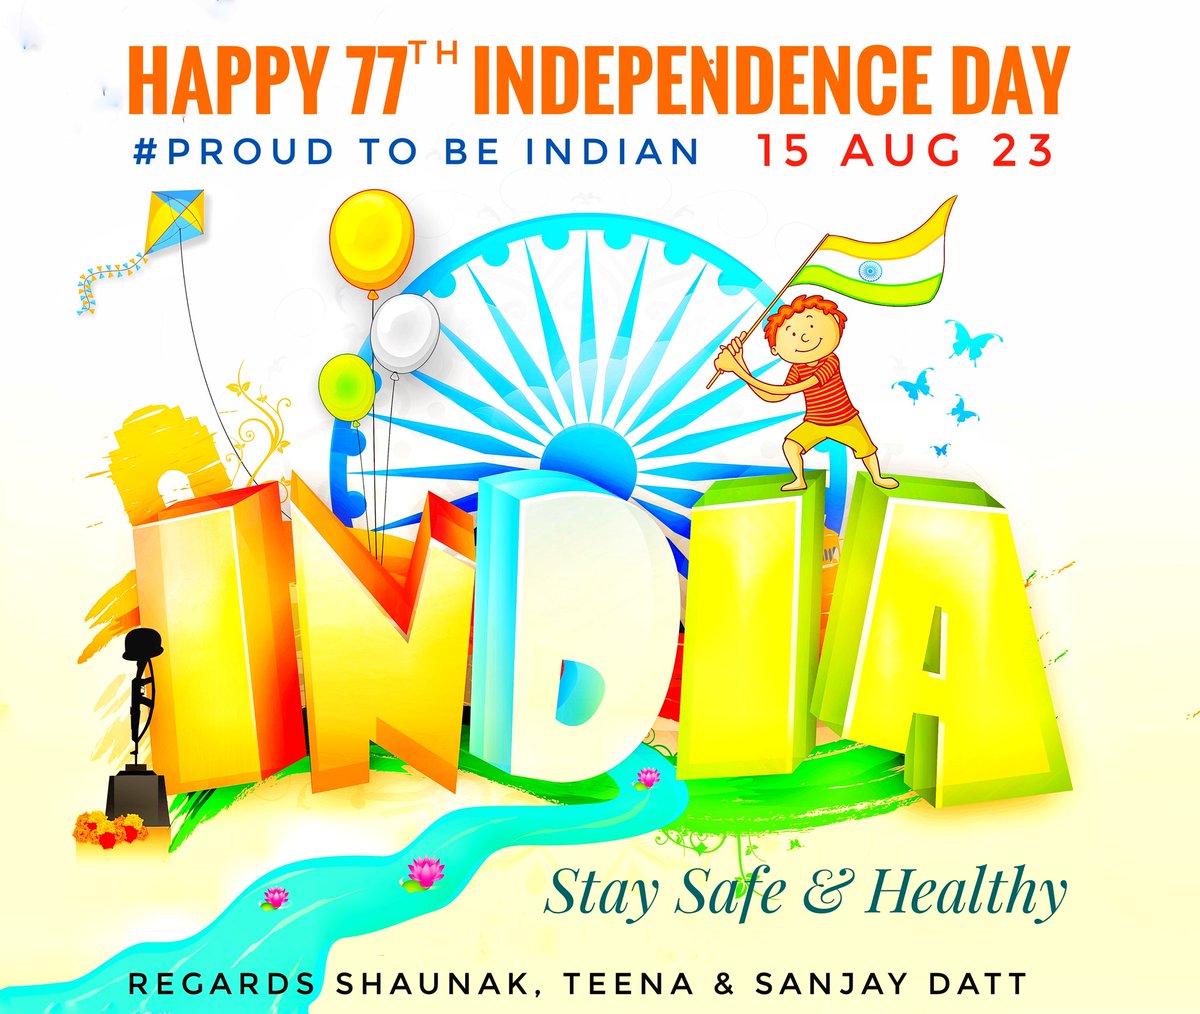 Happy 77th Independence Day. May we work together to make India great..
#ProudToBeIndian 
#CDM_IDS